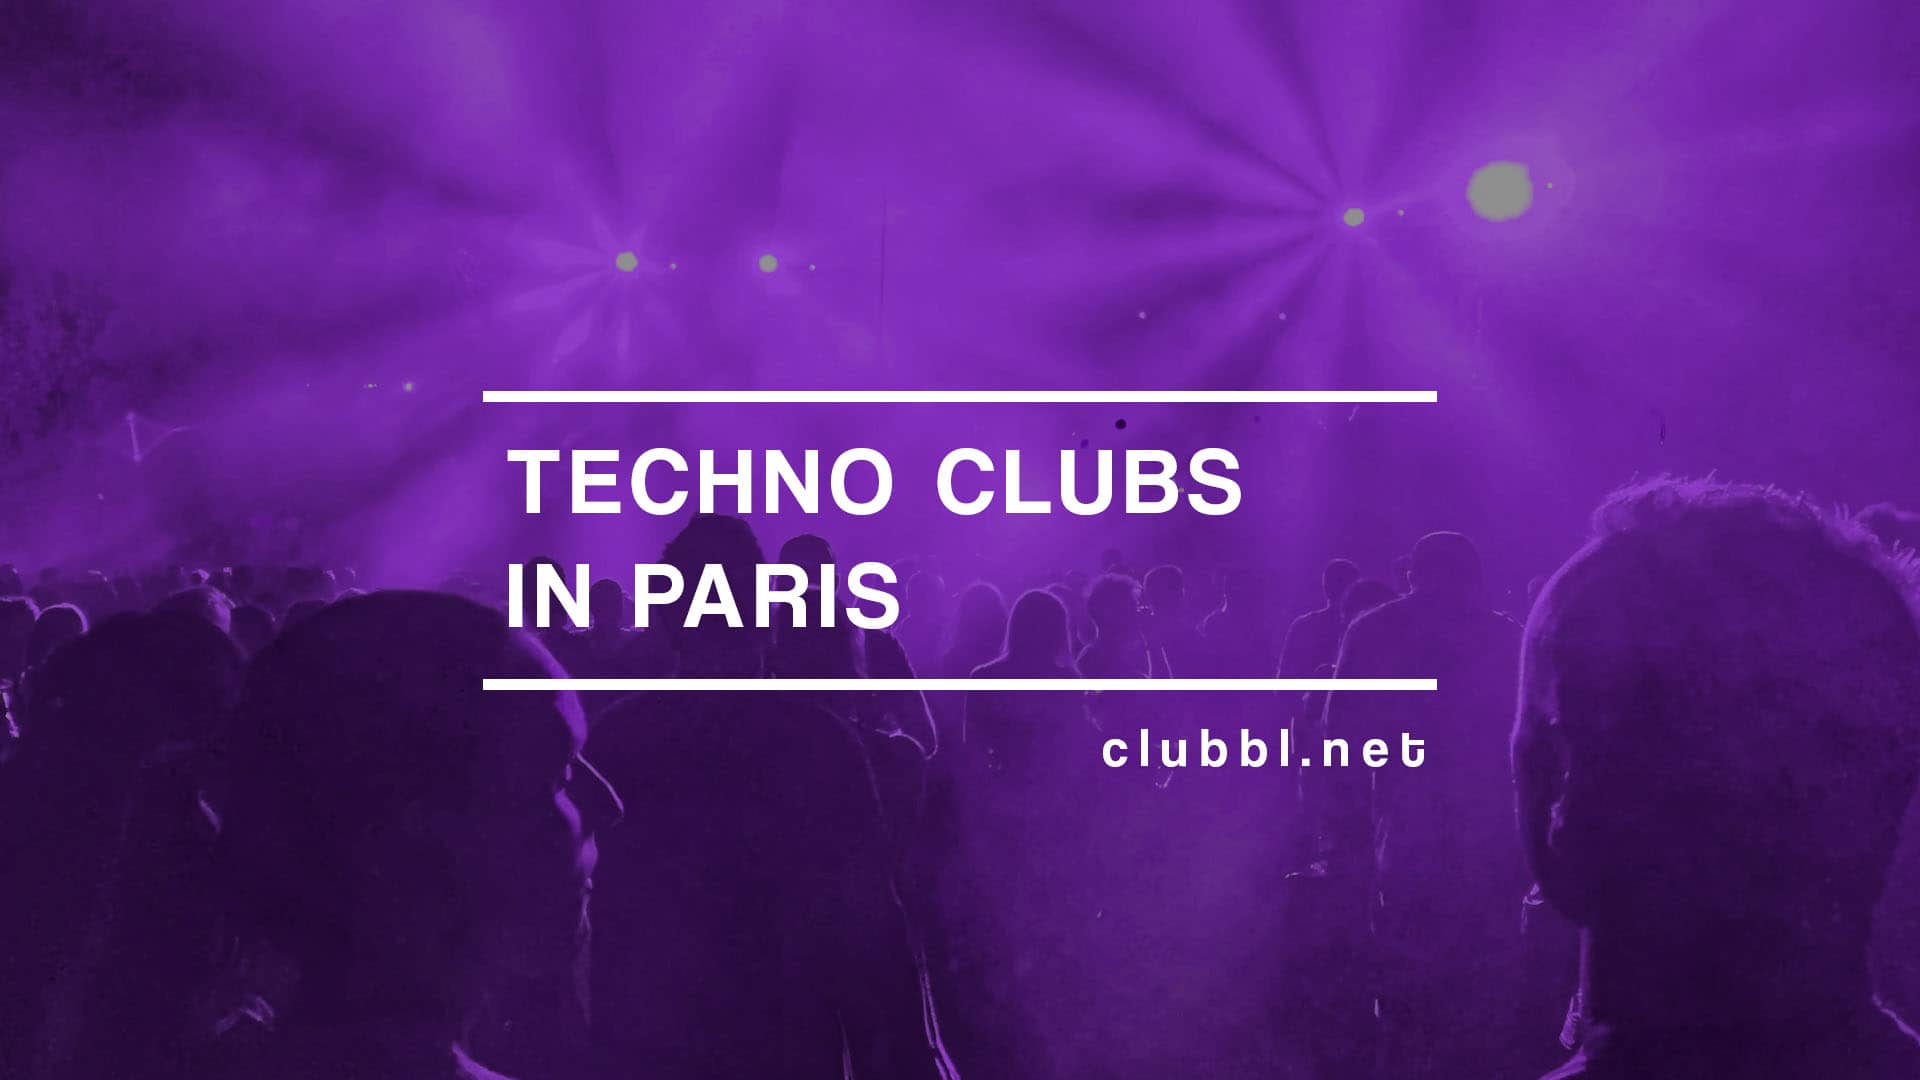 Techno clubs in Paris - List of techno clubs in paris for a good night out